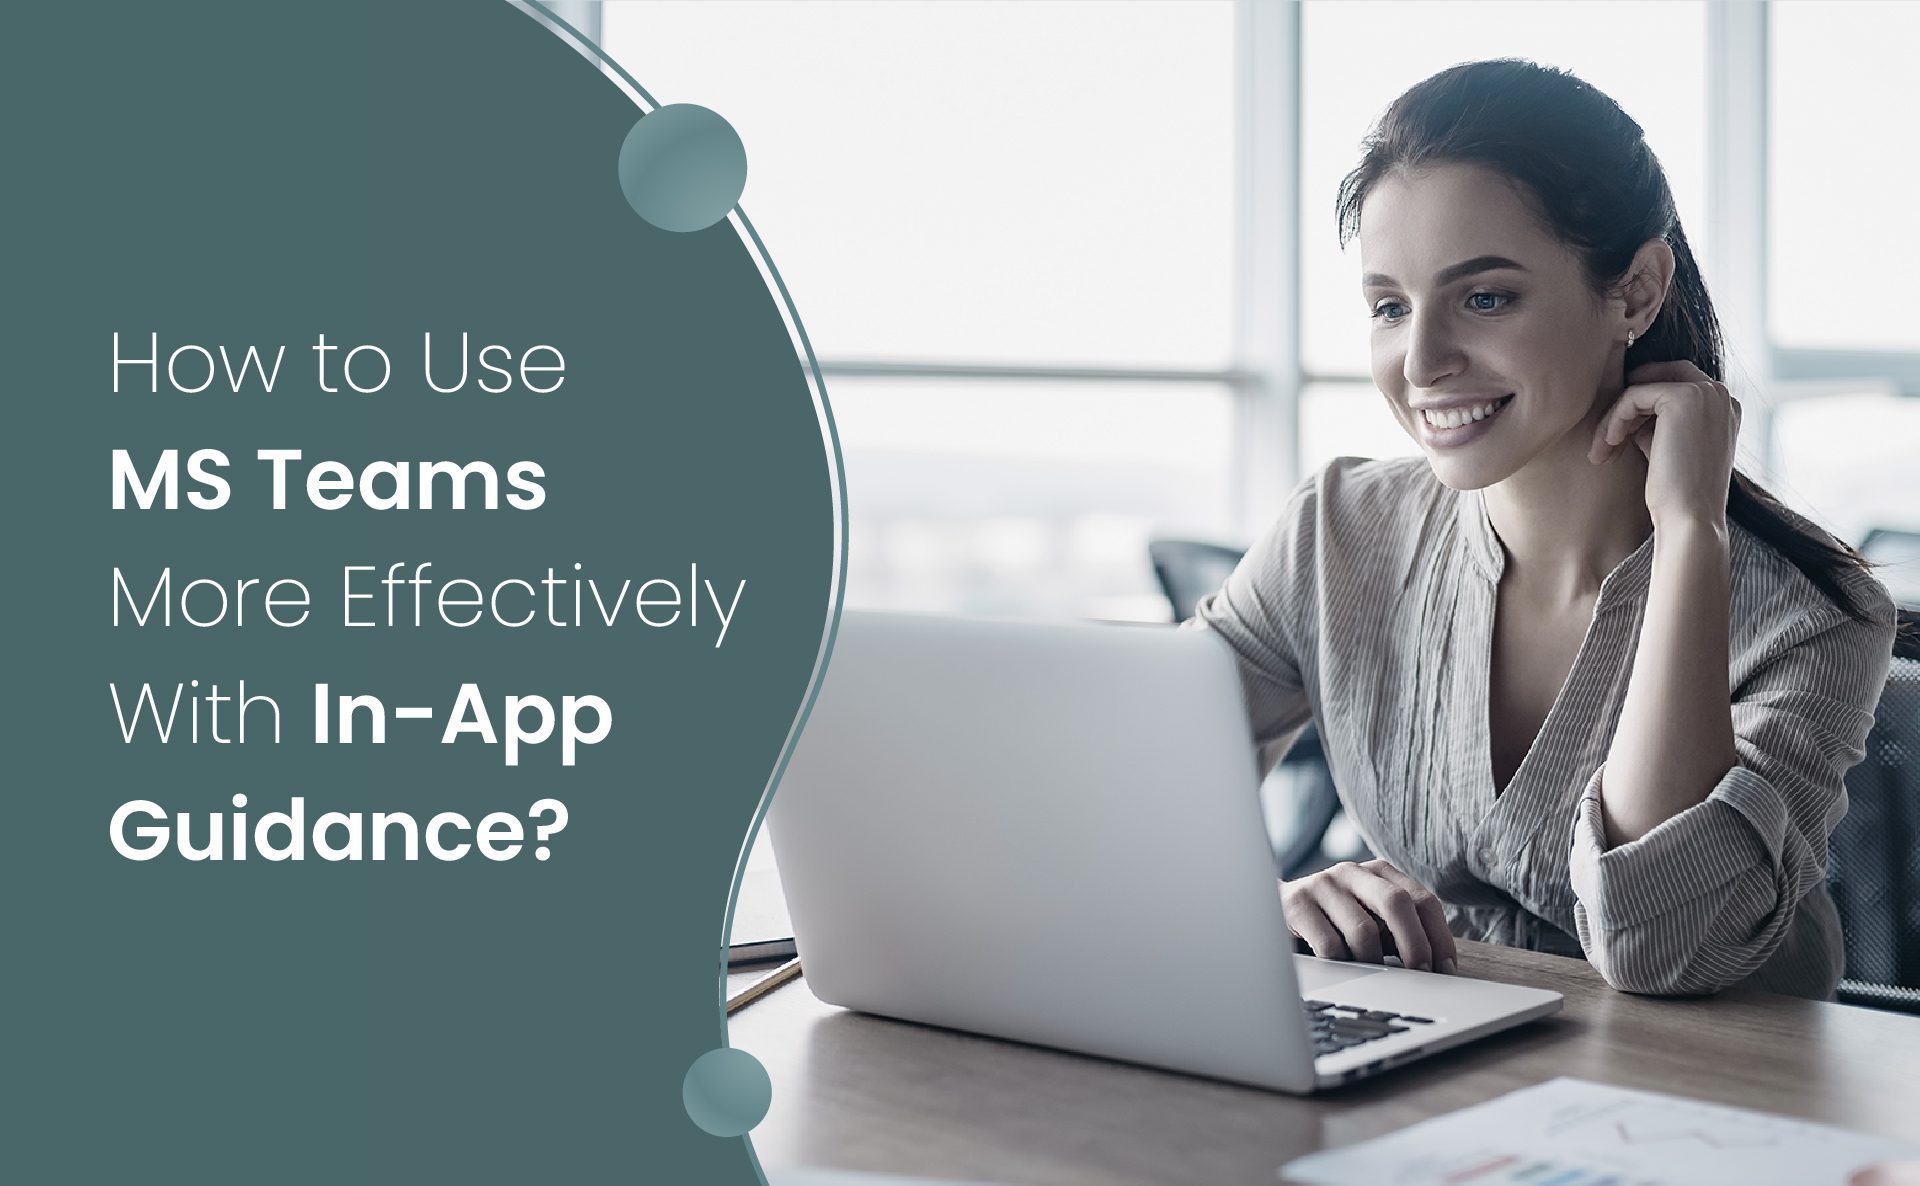 How to use MS Teams more effectively with in-app guidance